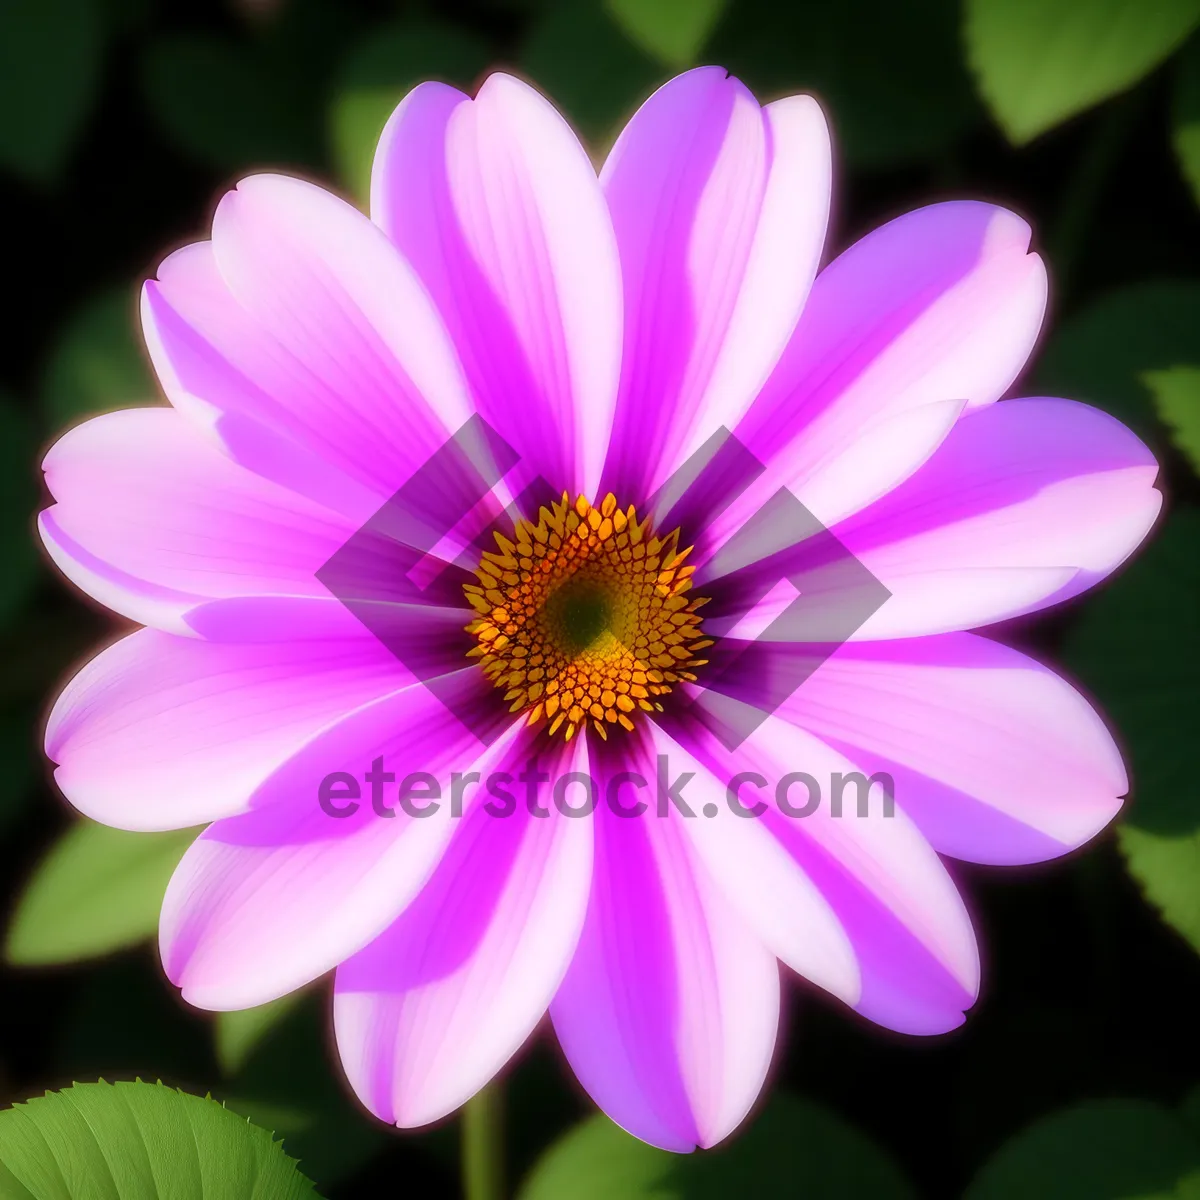 Picture of Vibrant Pink Daisy Blossom in Summer Garden